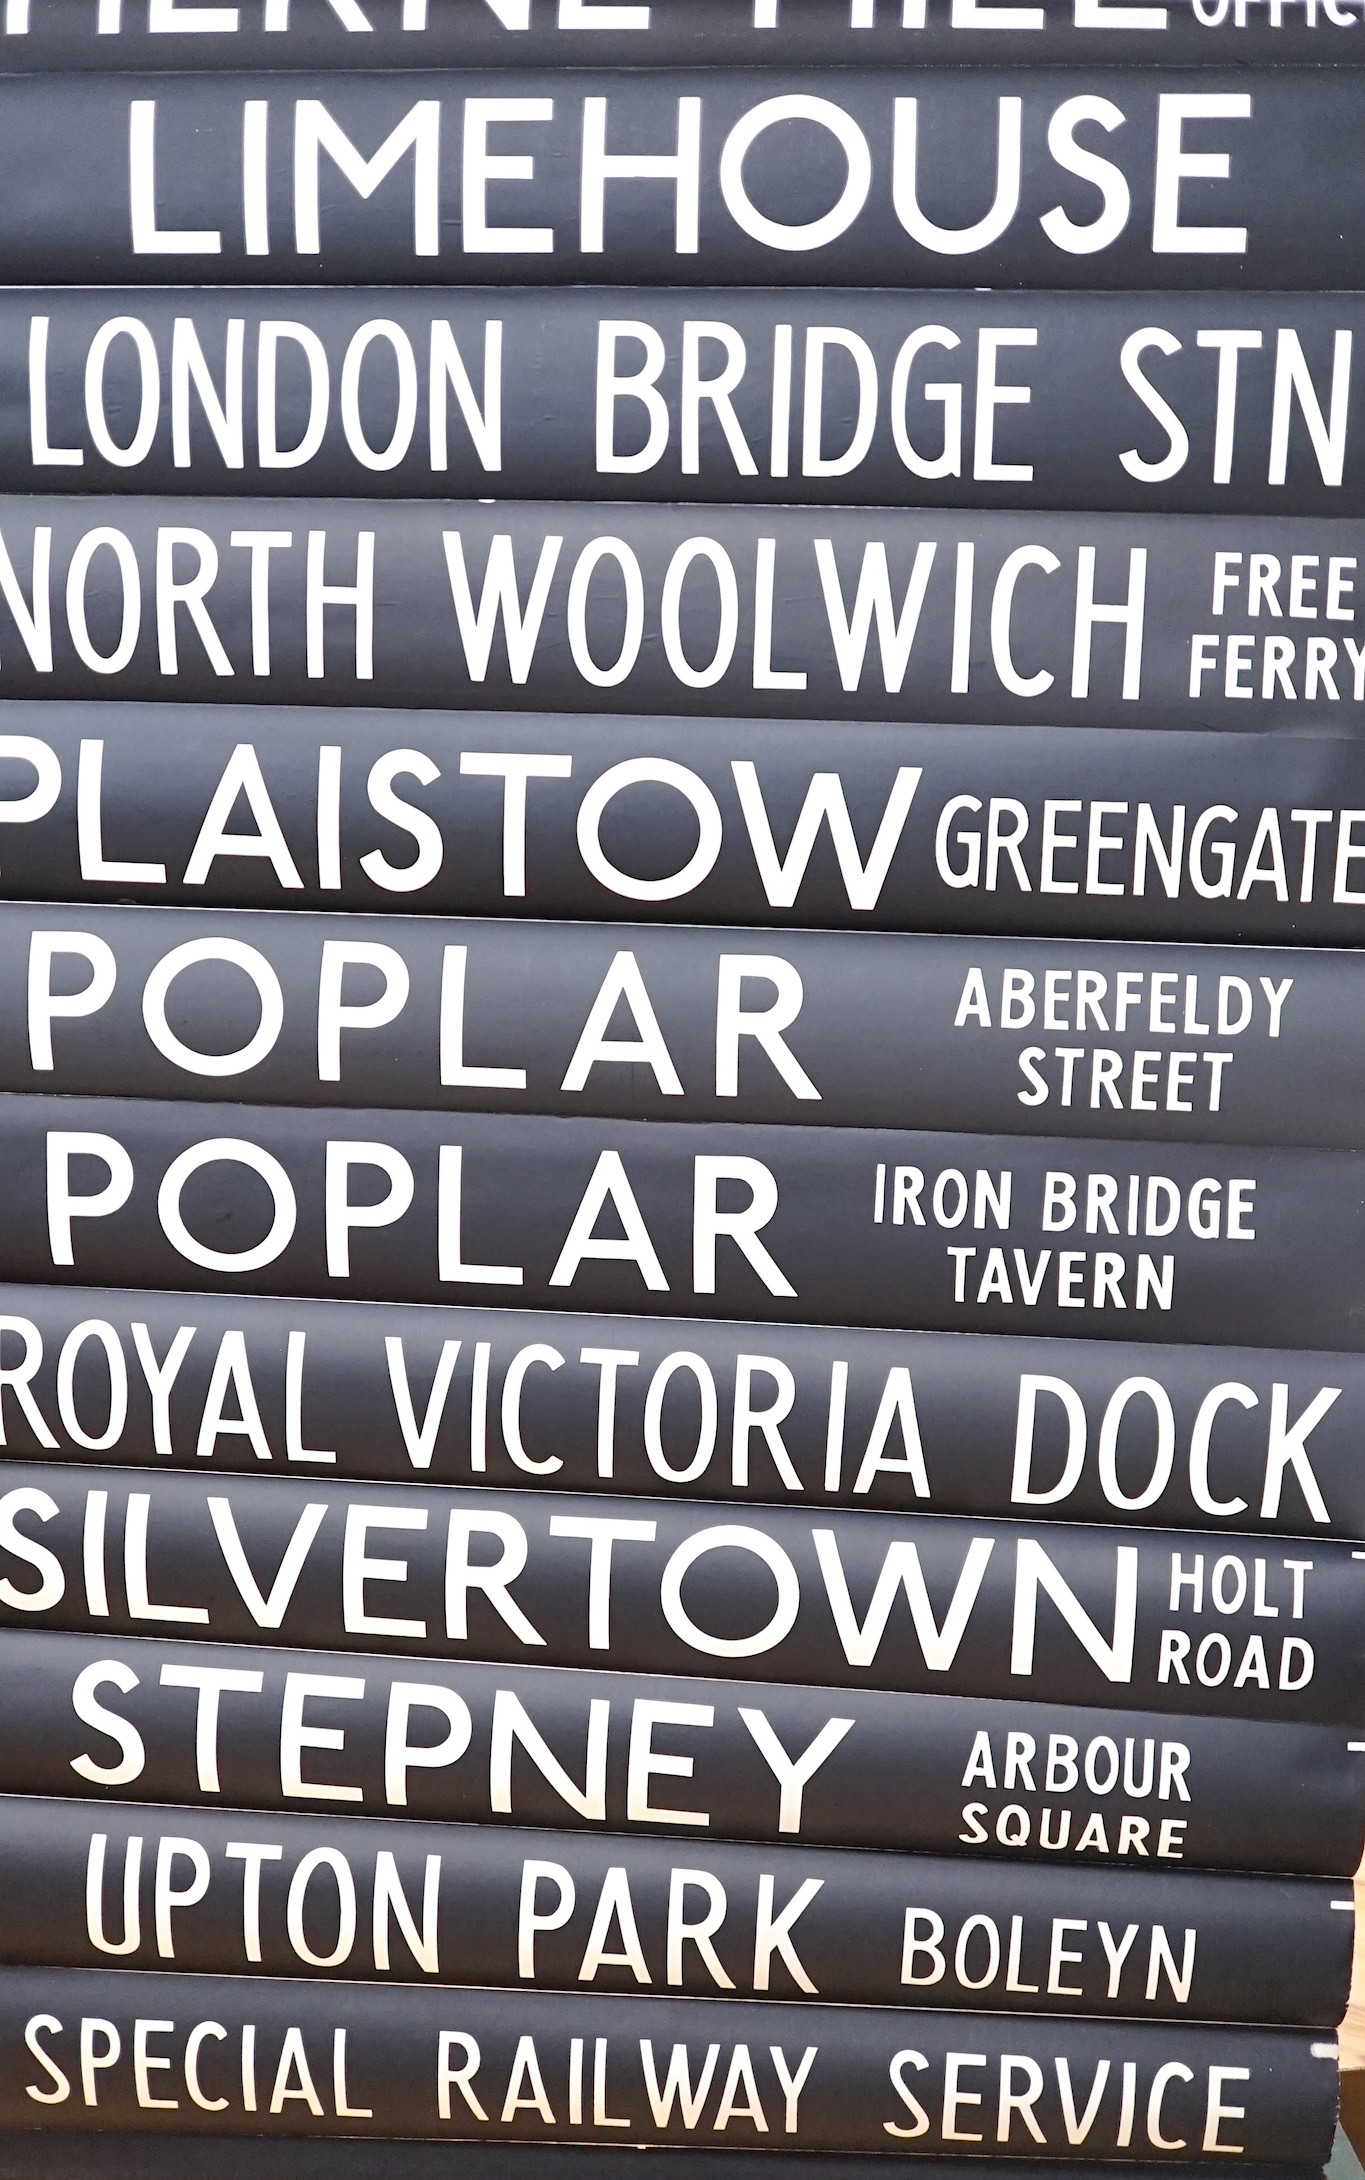 Three 1970's bus destination canvas lined blinds, Edmonton and other London Boroughs